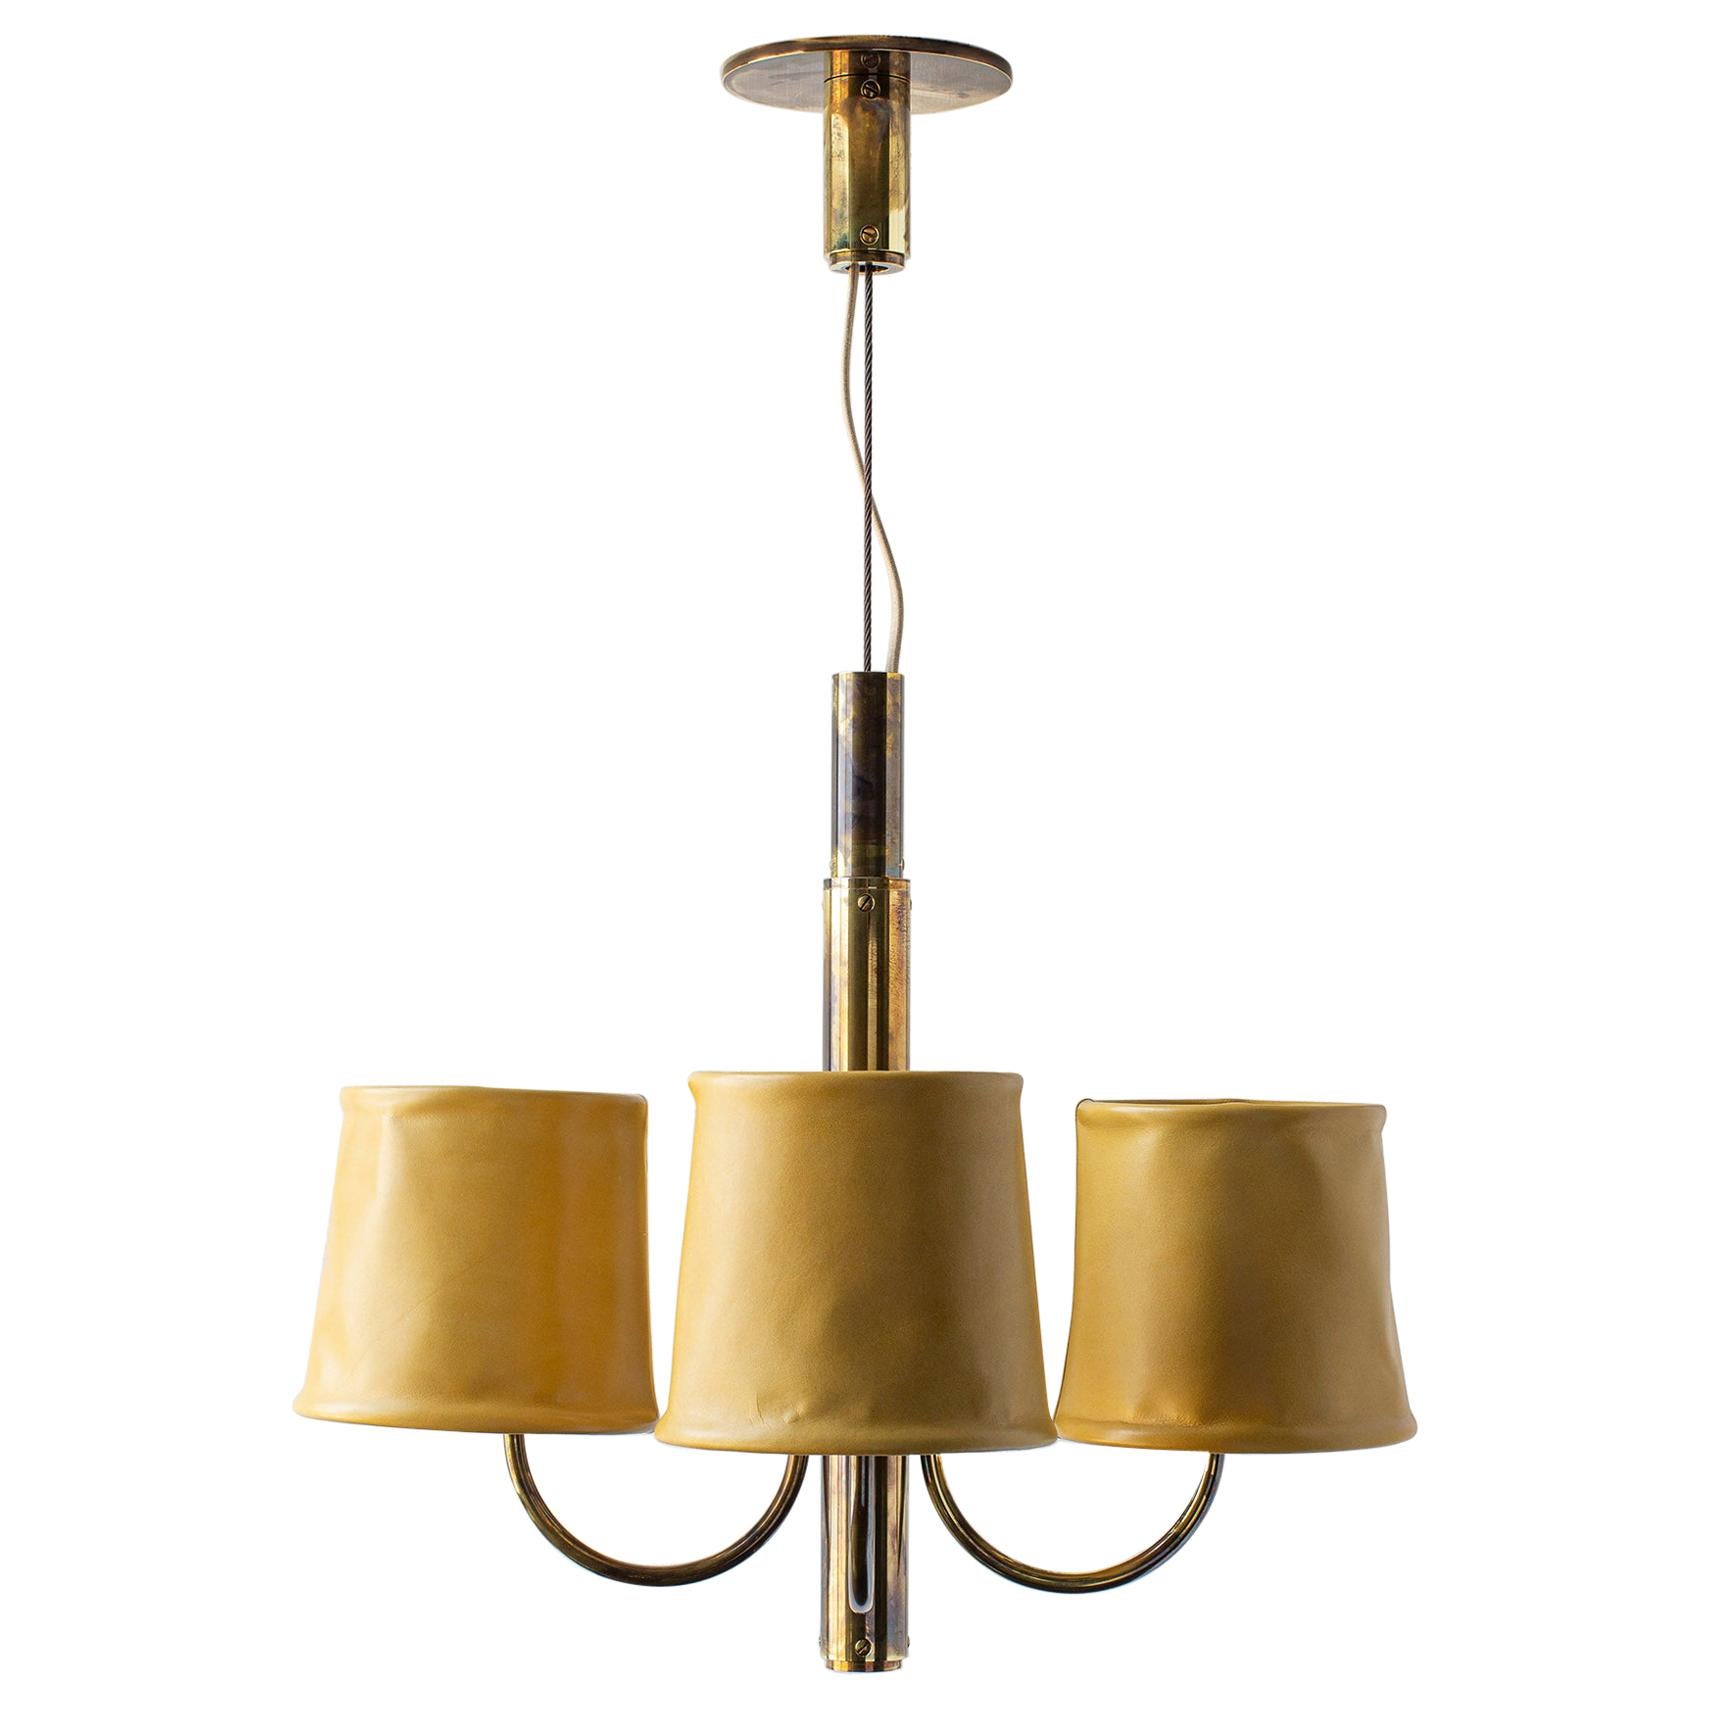 Series01 Upright Electrolier, Smoke Patinated Brass, Mustard Leather Shades For Sale